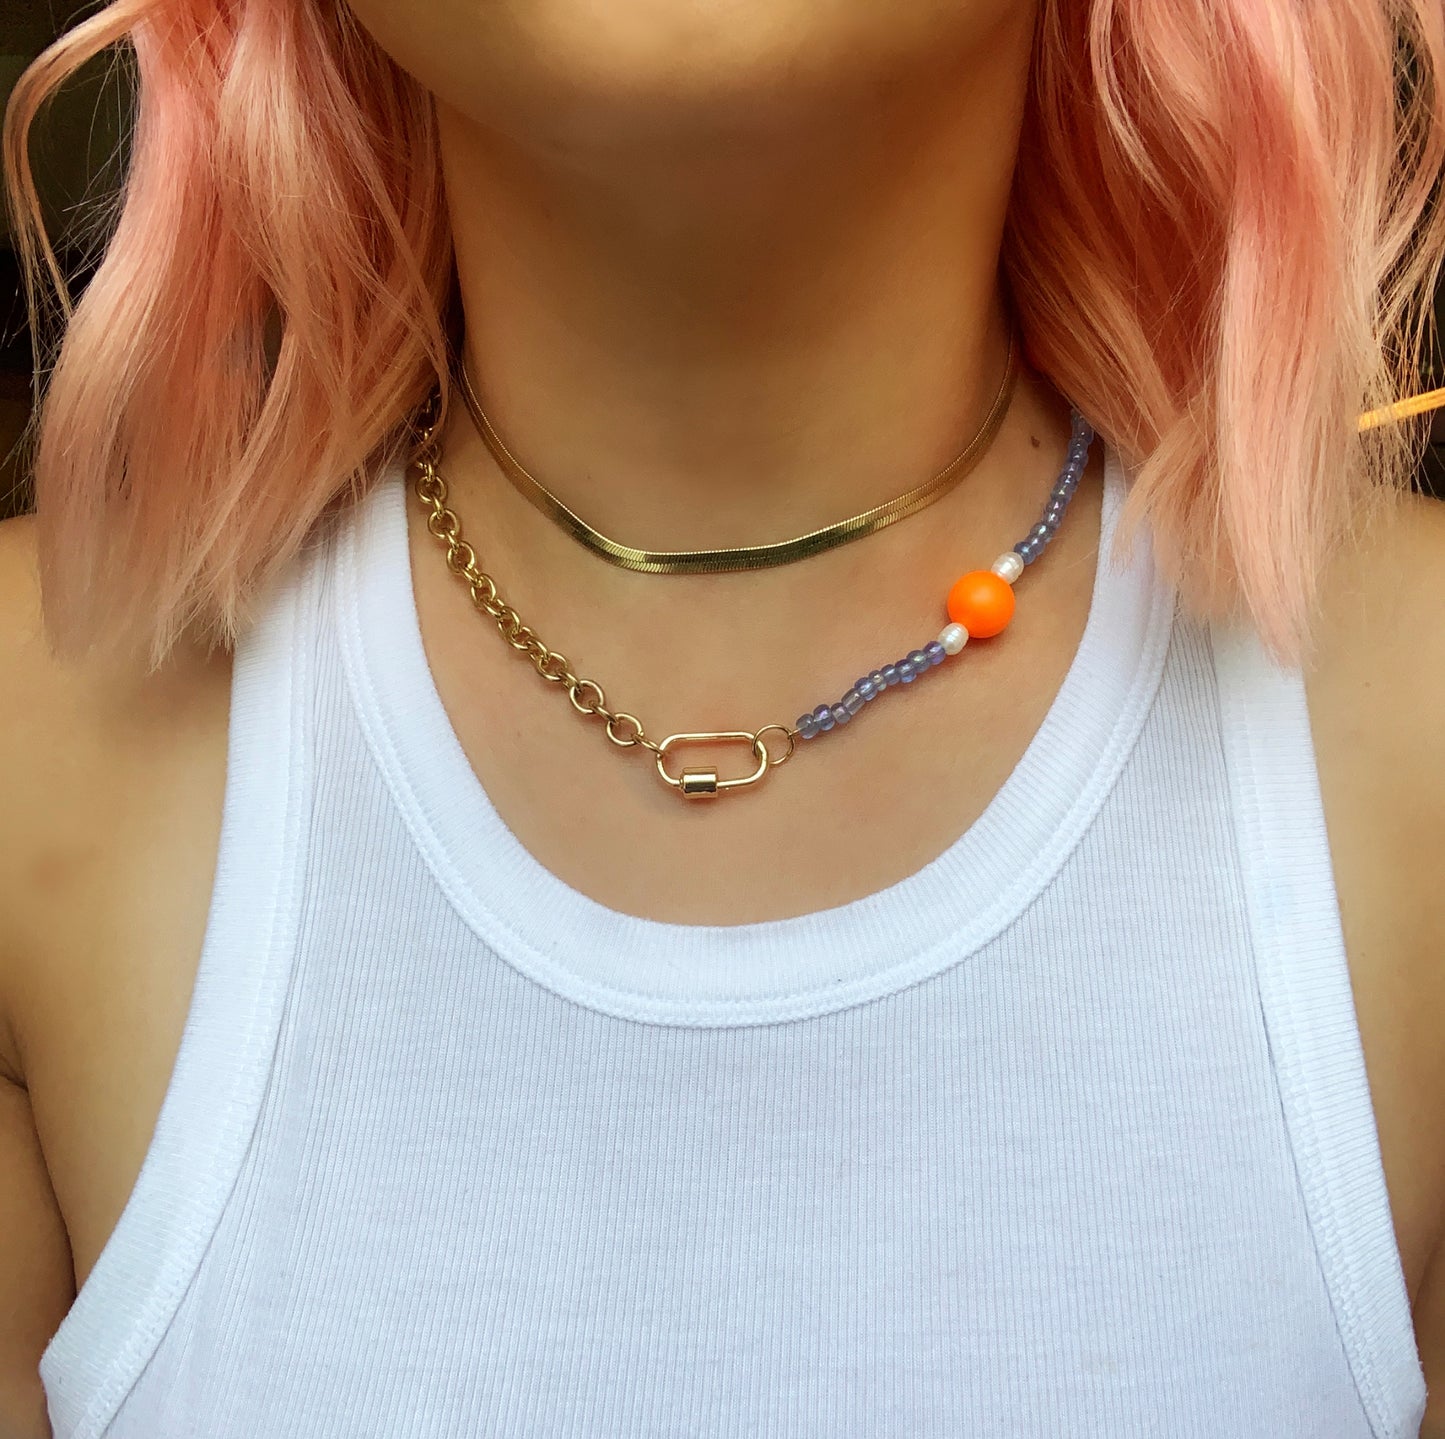 🍊 Neon Periwinkle 50/50 Chain